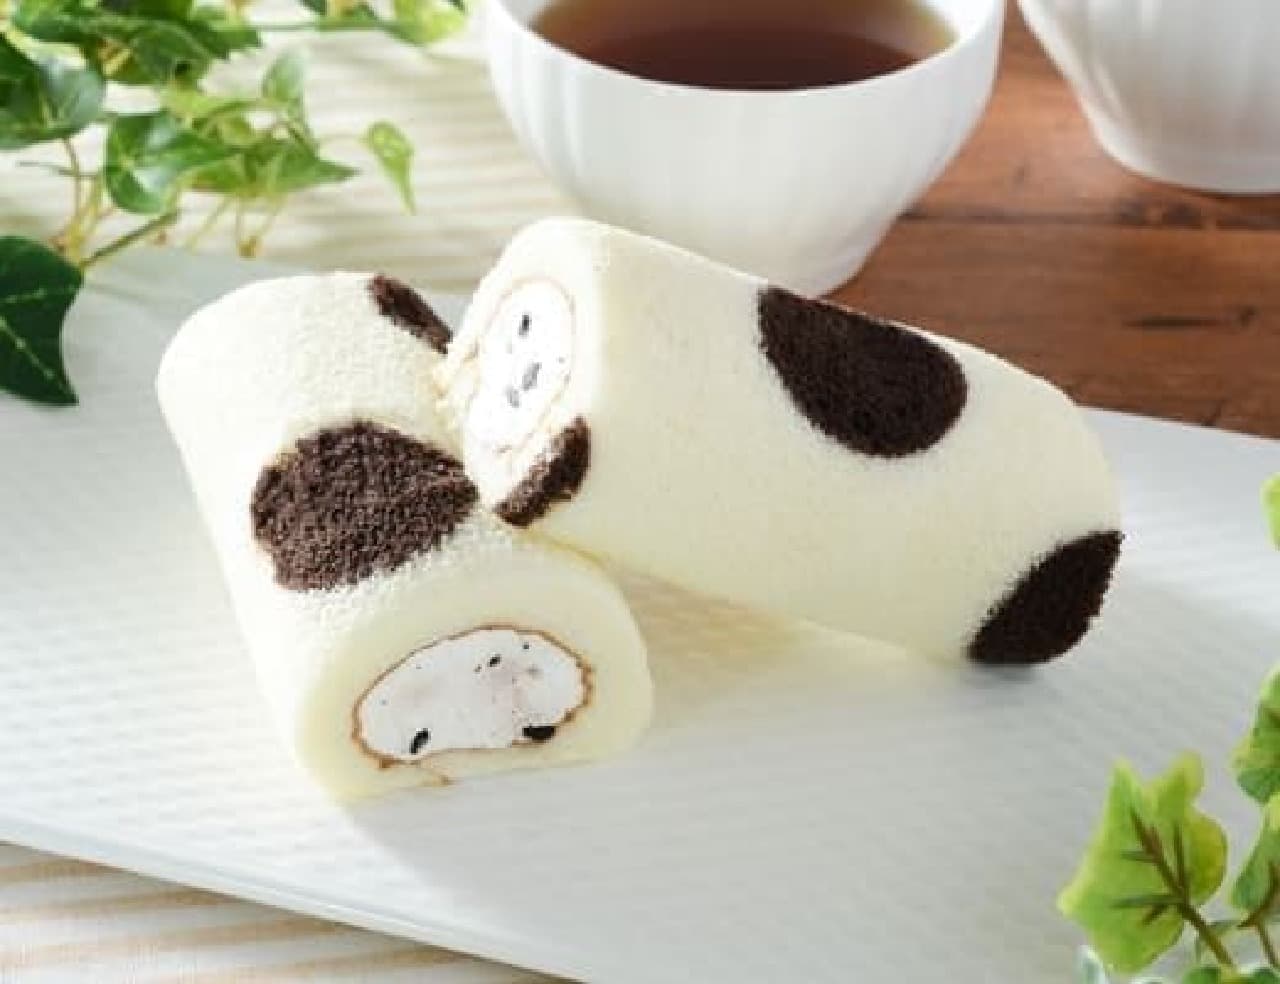 Lawson "Mini Mochi Texture Roll (Cream with Cookies) 2 Pieces"